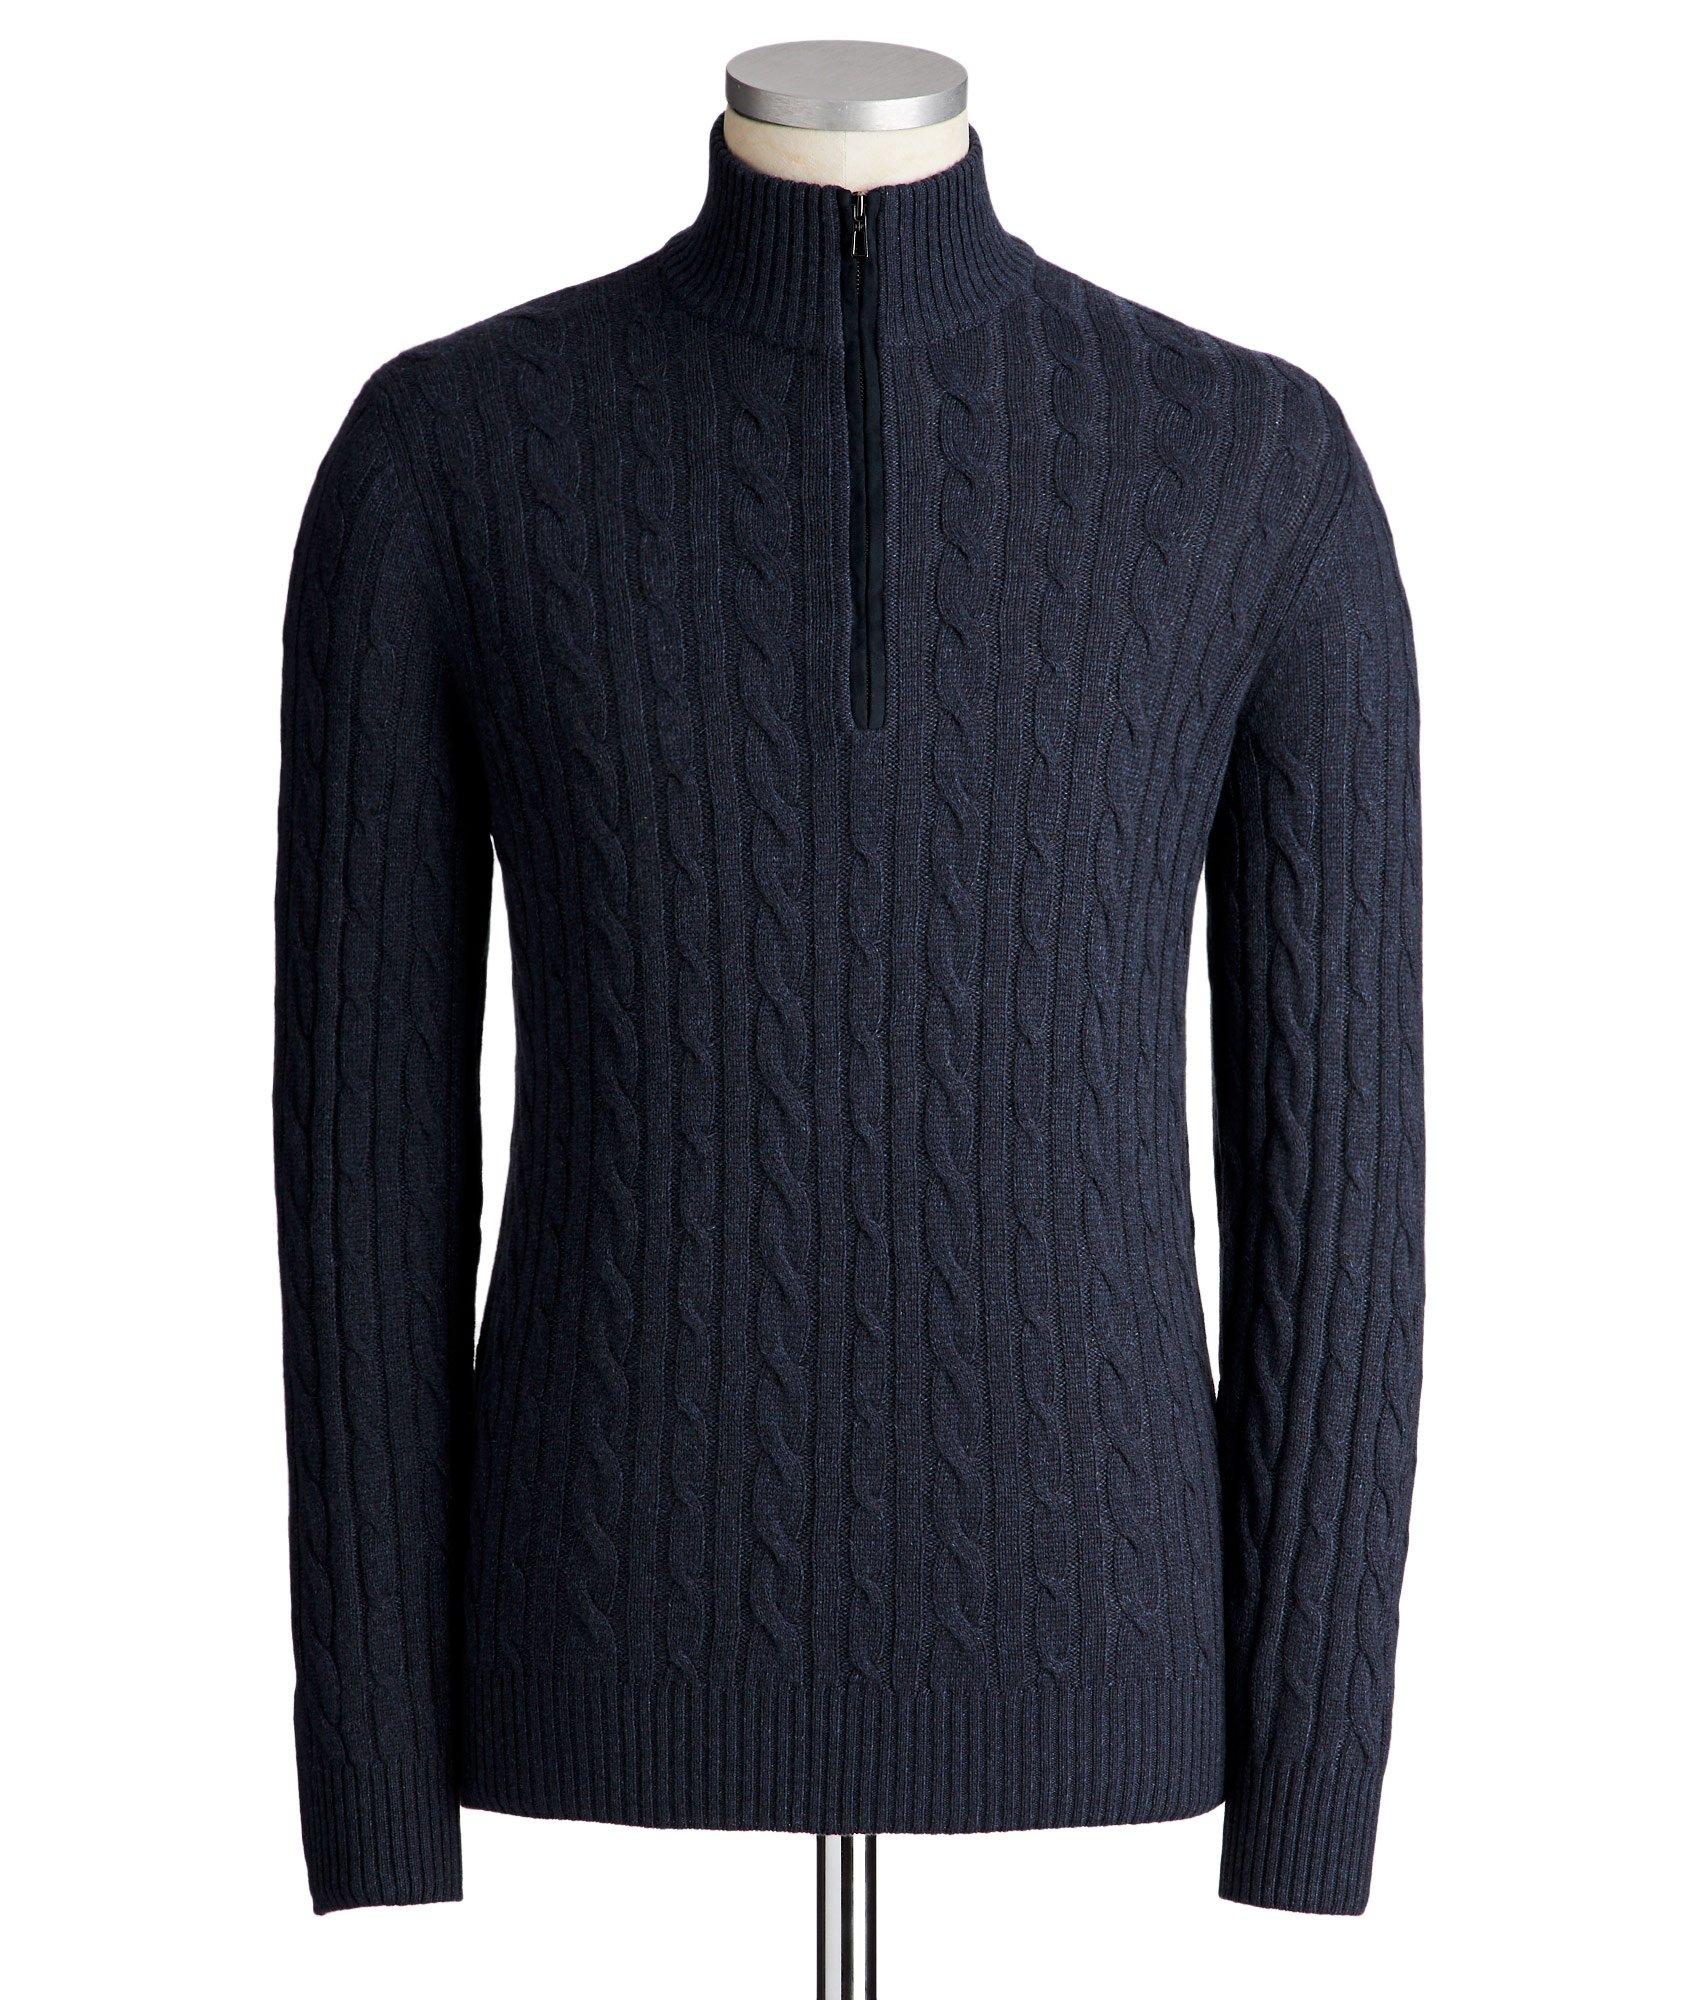 Half-Zip Baby Cashmere Cable Knit Sweater image 0